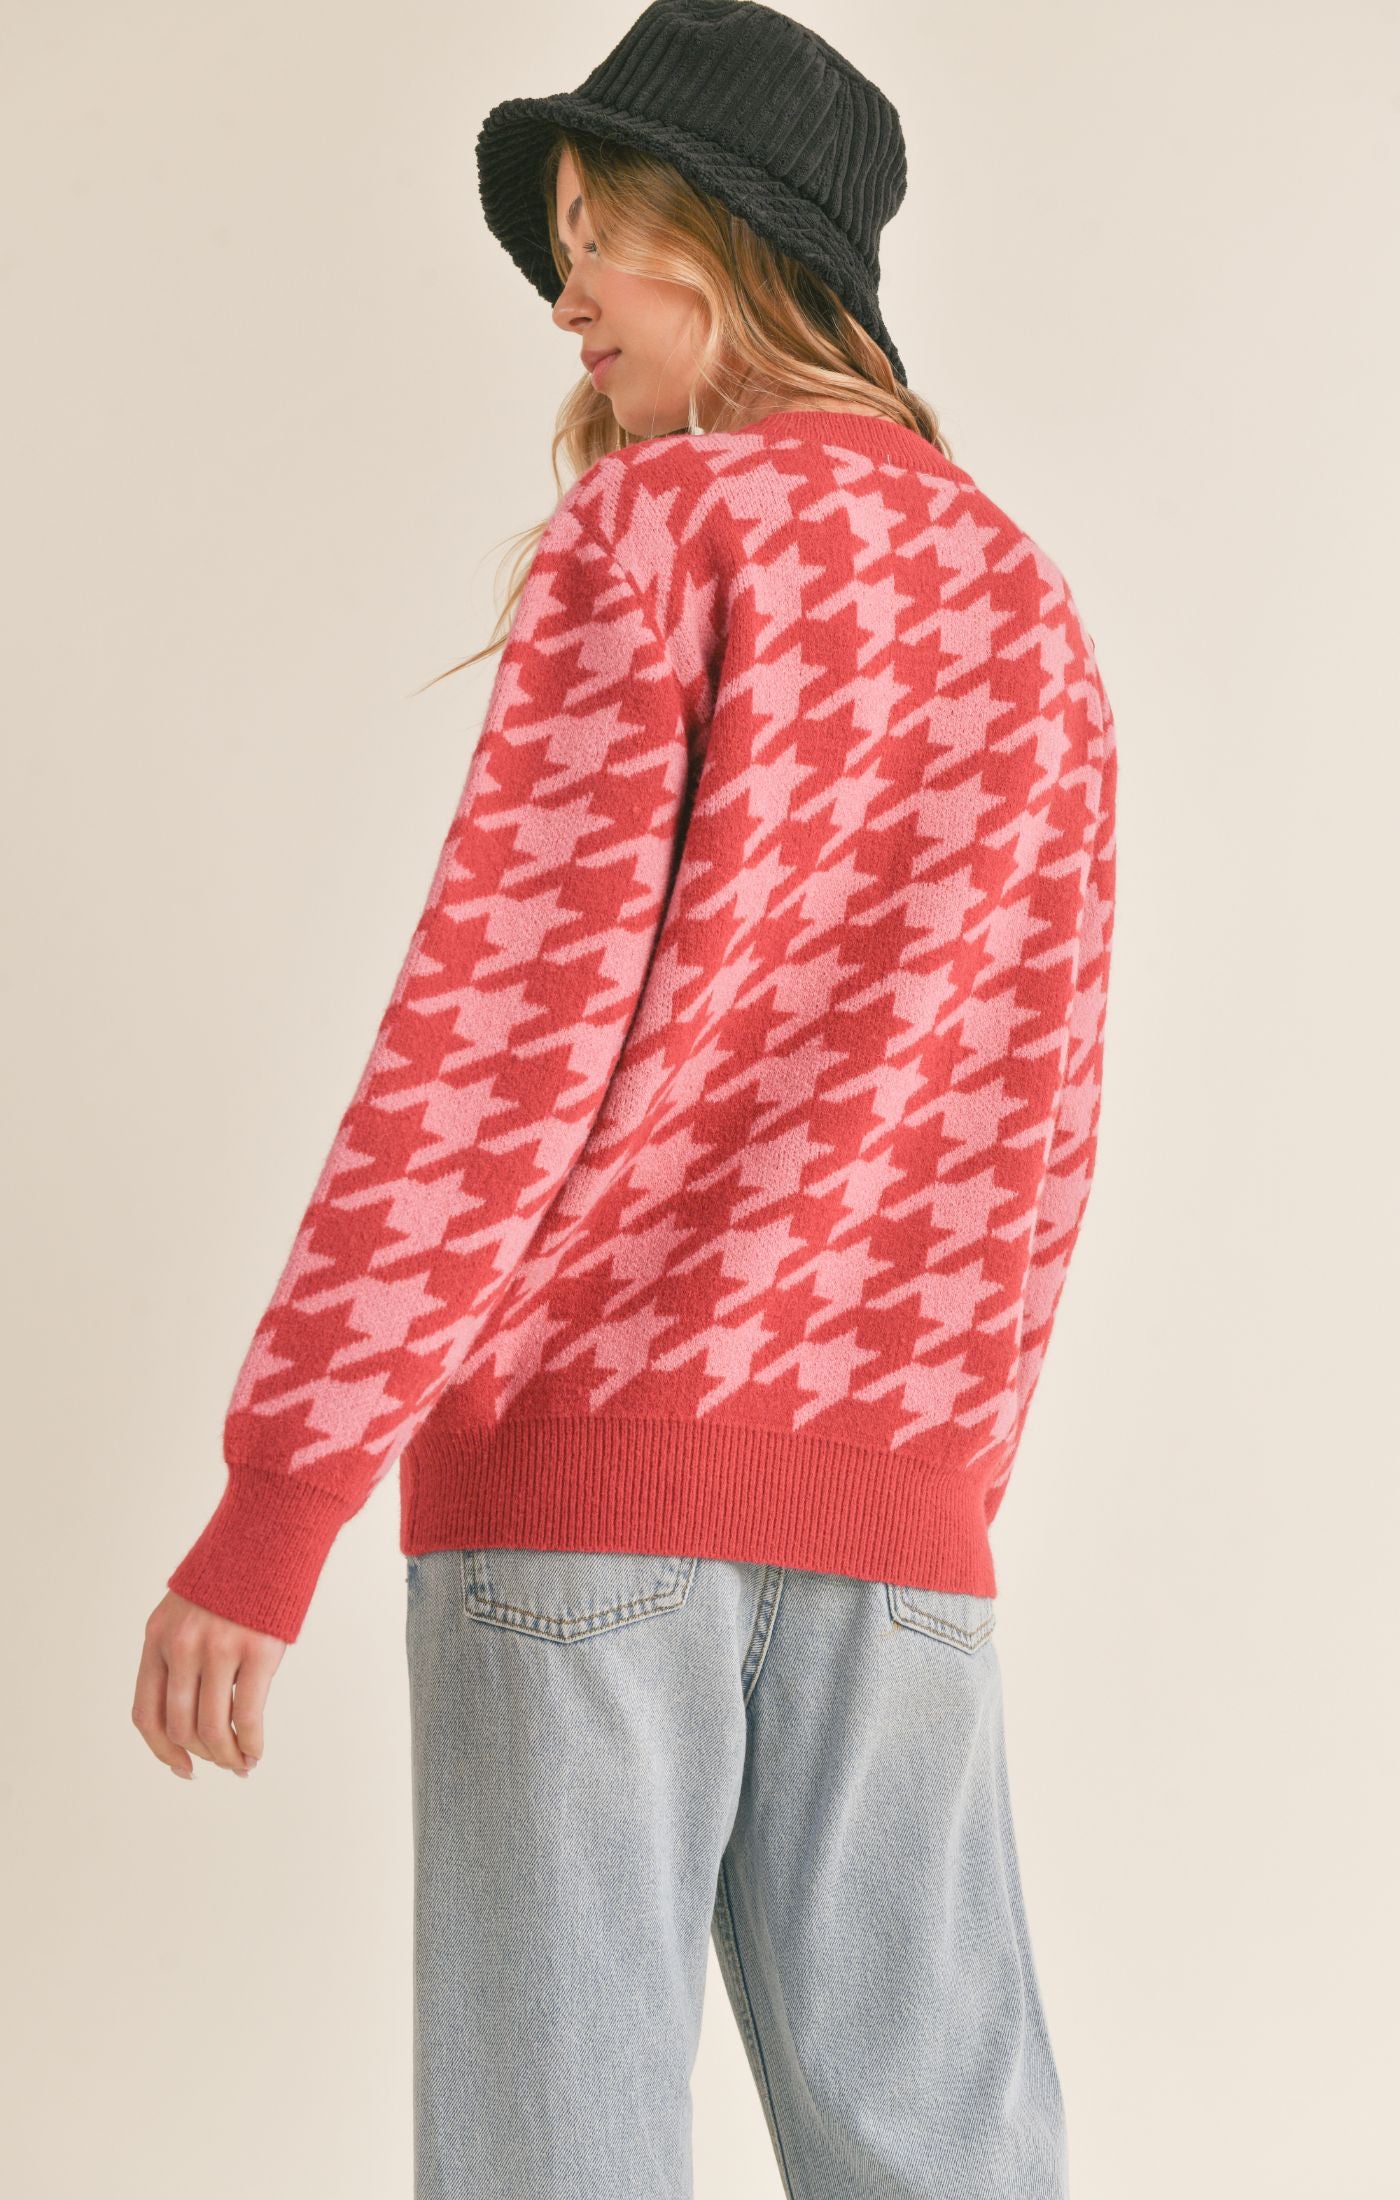 SENNA HOUNDSTOOTH SWEATER-pink red,houndstooth pattern,long sleeves,round neck